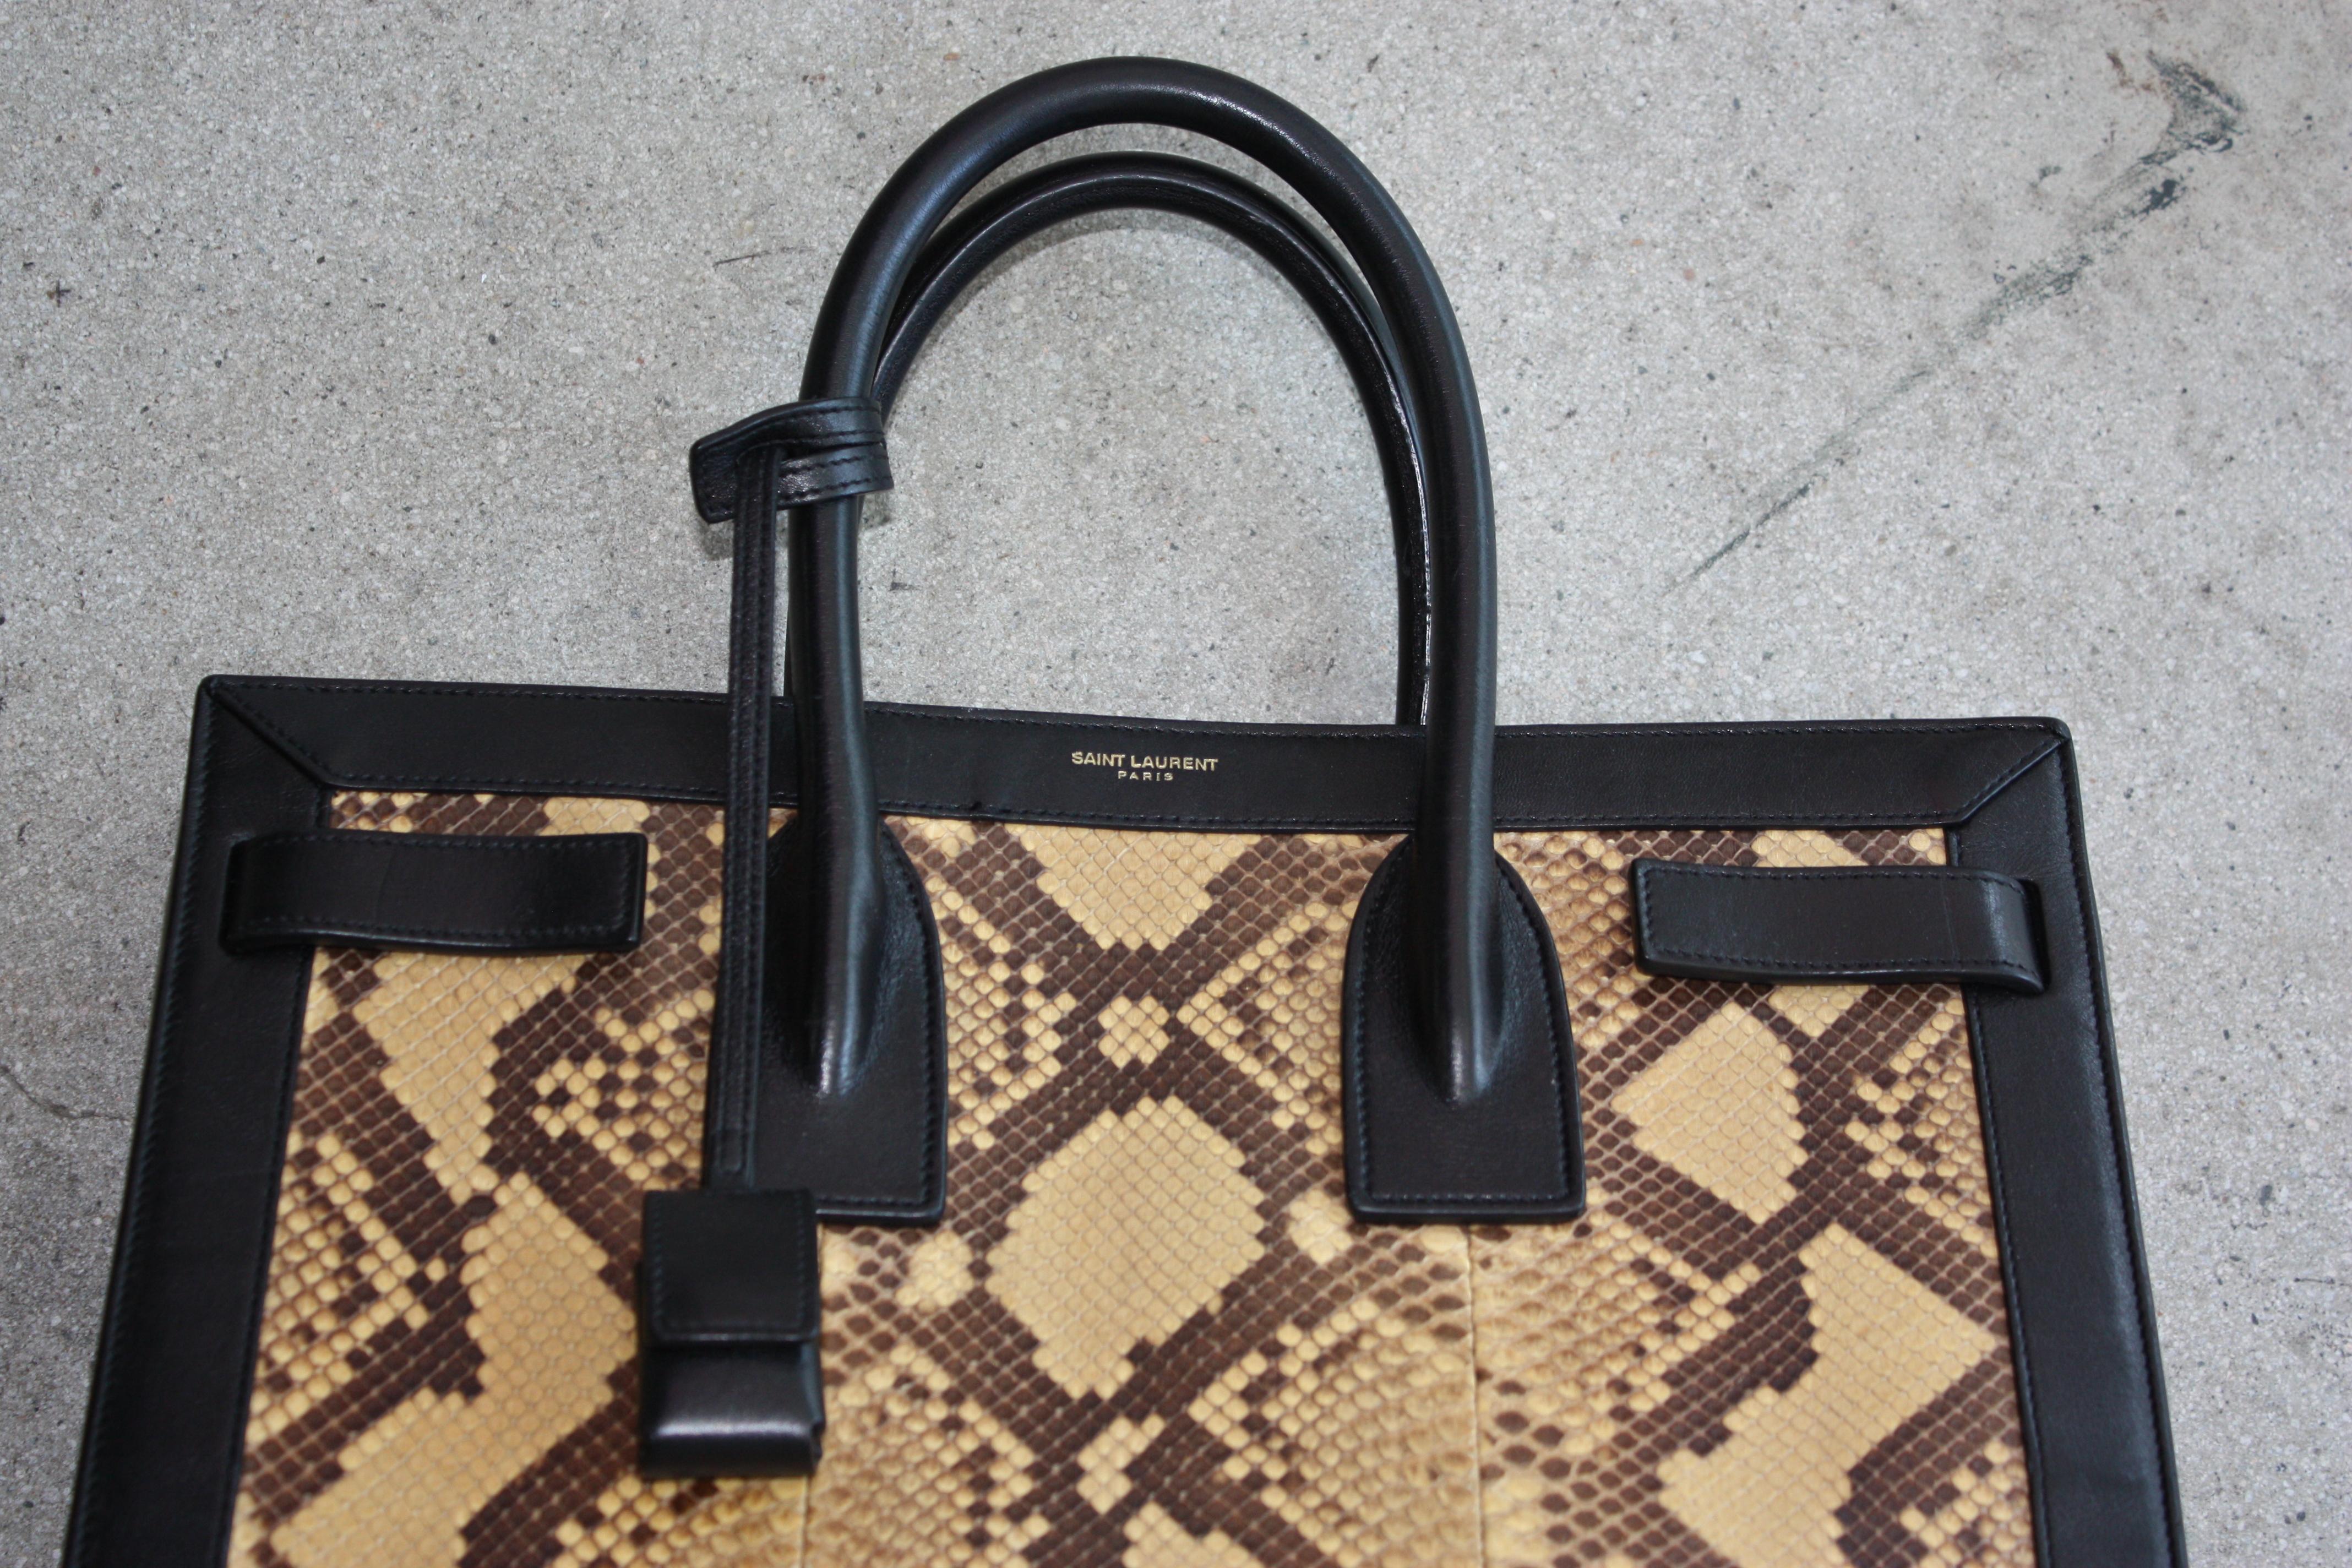 Saint Laurent Black and Python Tote Bag (Never Been used)  1